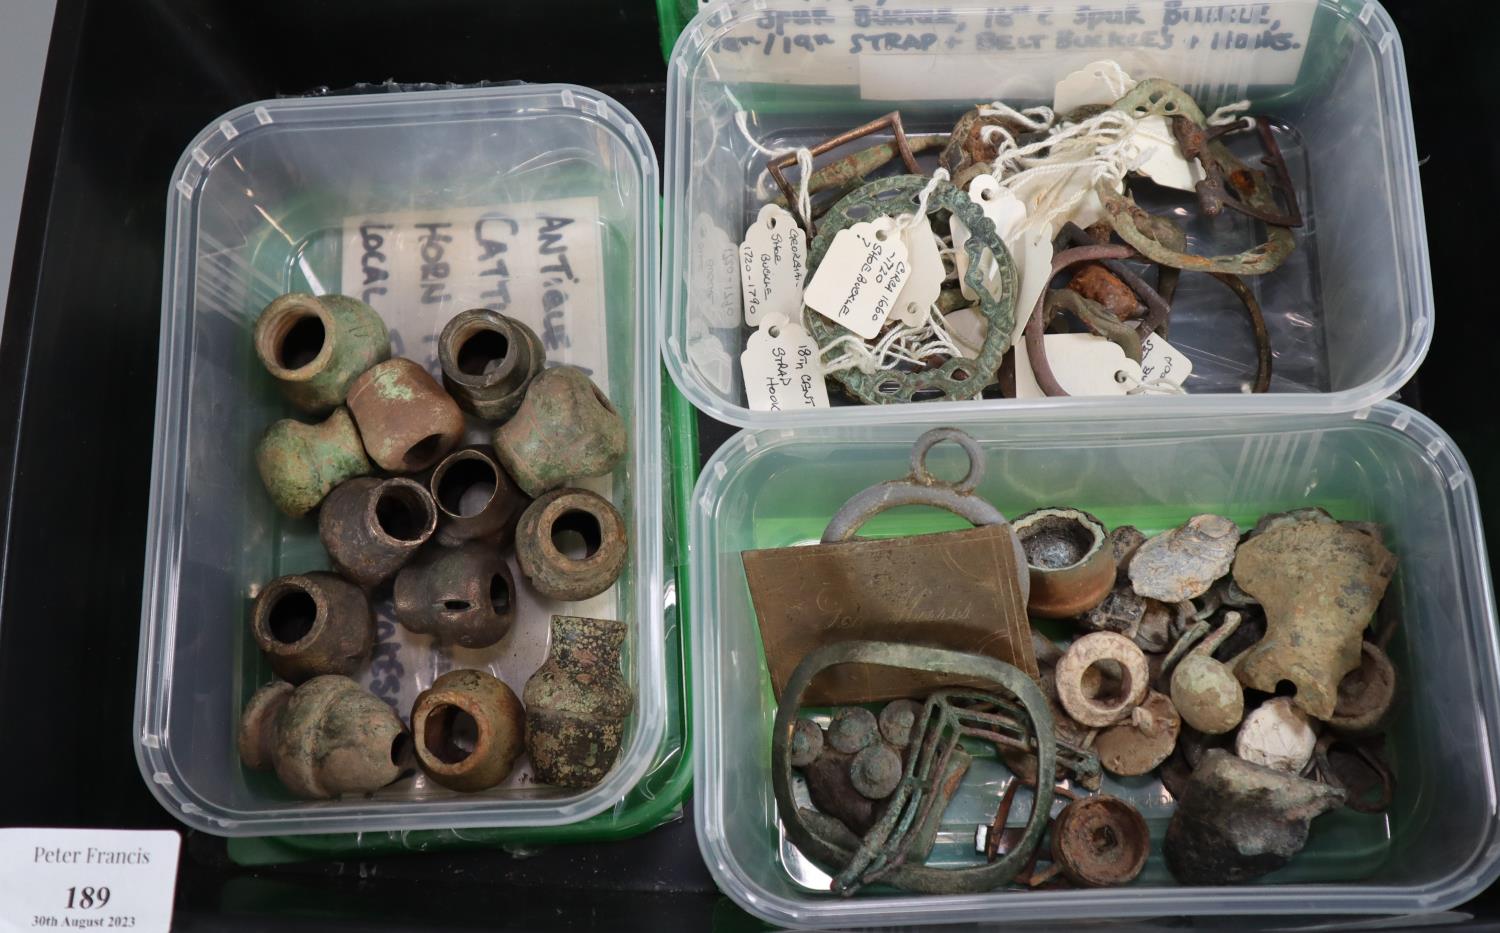 Large collection of metal detectorists finds, to include: buckles, brass plaques, etc. believes to